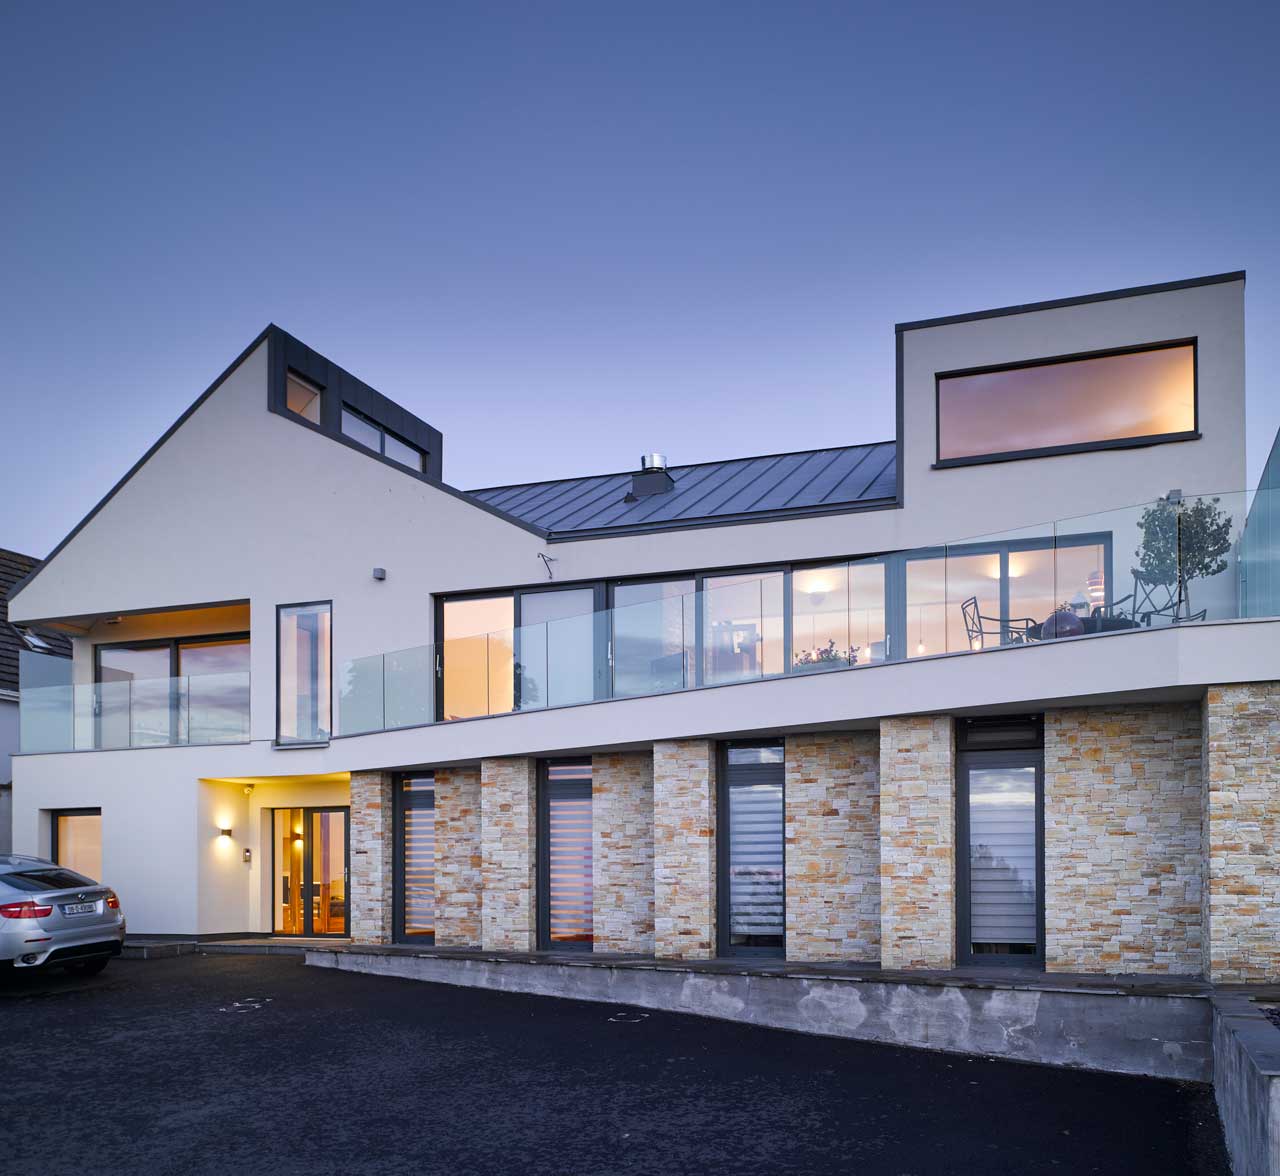 Exterior view of the front of the 'Galtee Lodge' designed by 'Dublin Design Studio'.